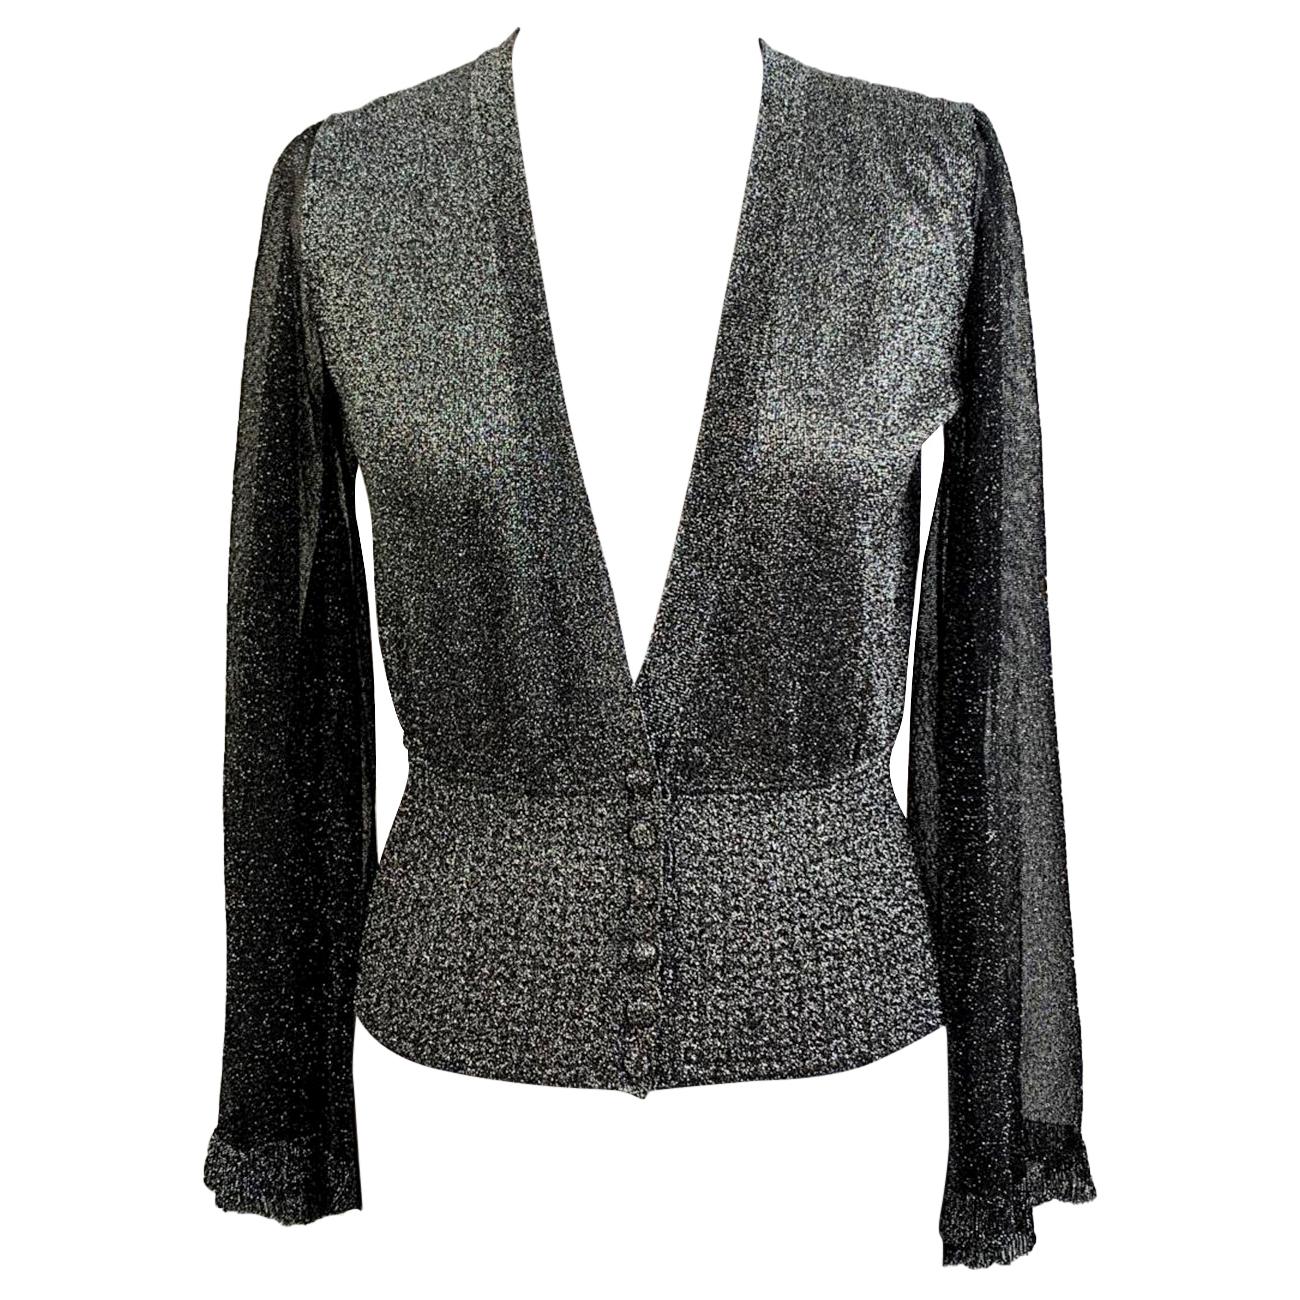 Missoni Silver Tone Lurex Cardigan with Flared Sleeves Size 38 IT